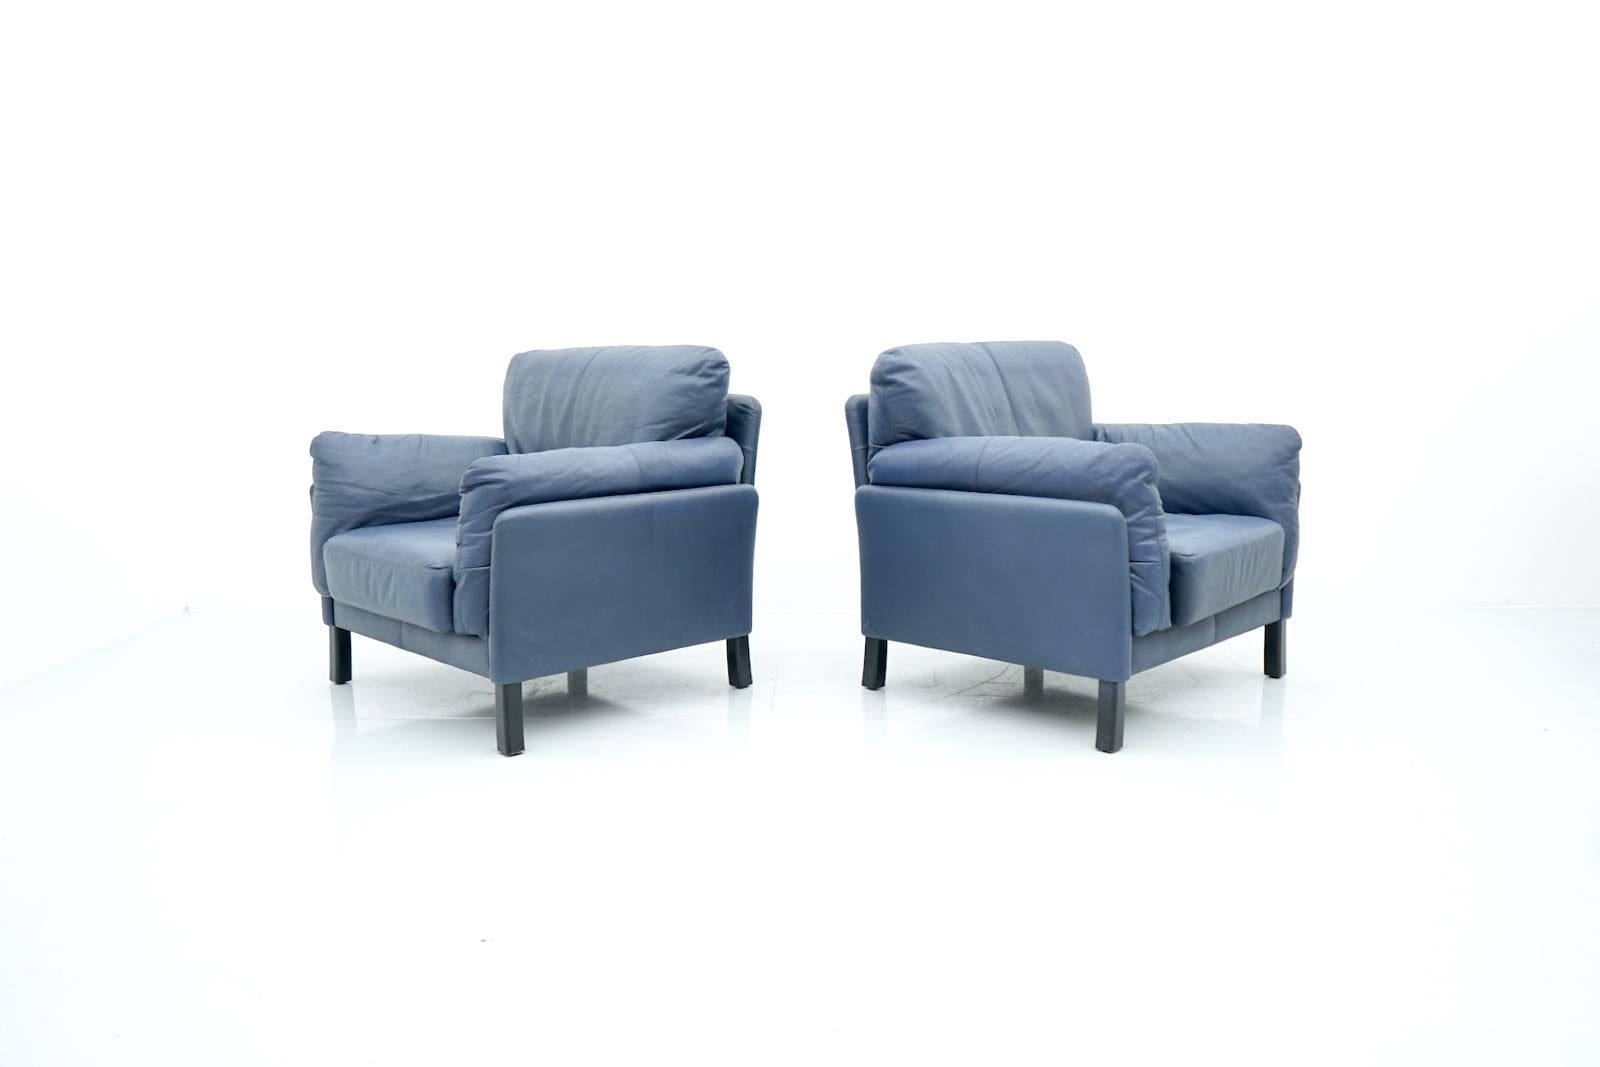 Late 20th Century Pair of Blue Leather Lounge Chairs by Dreipunkt International For Sale